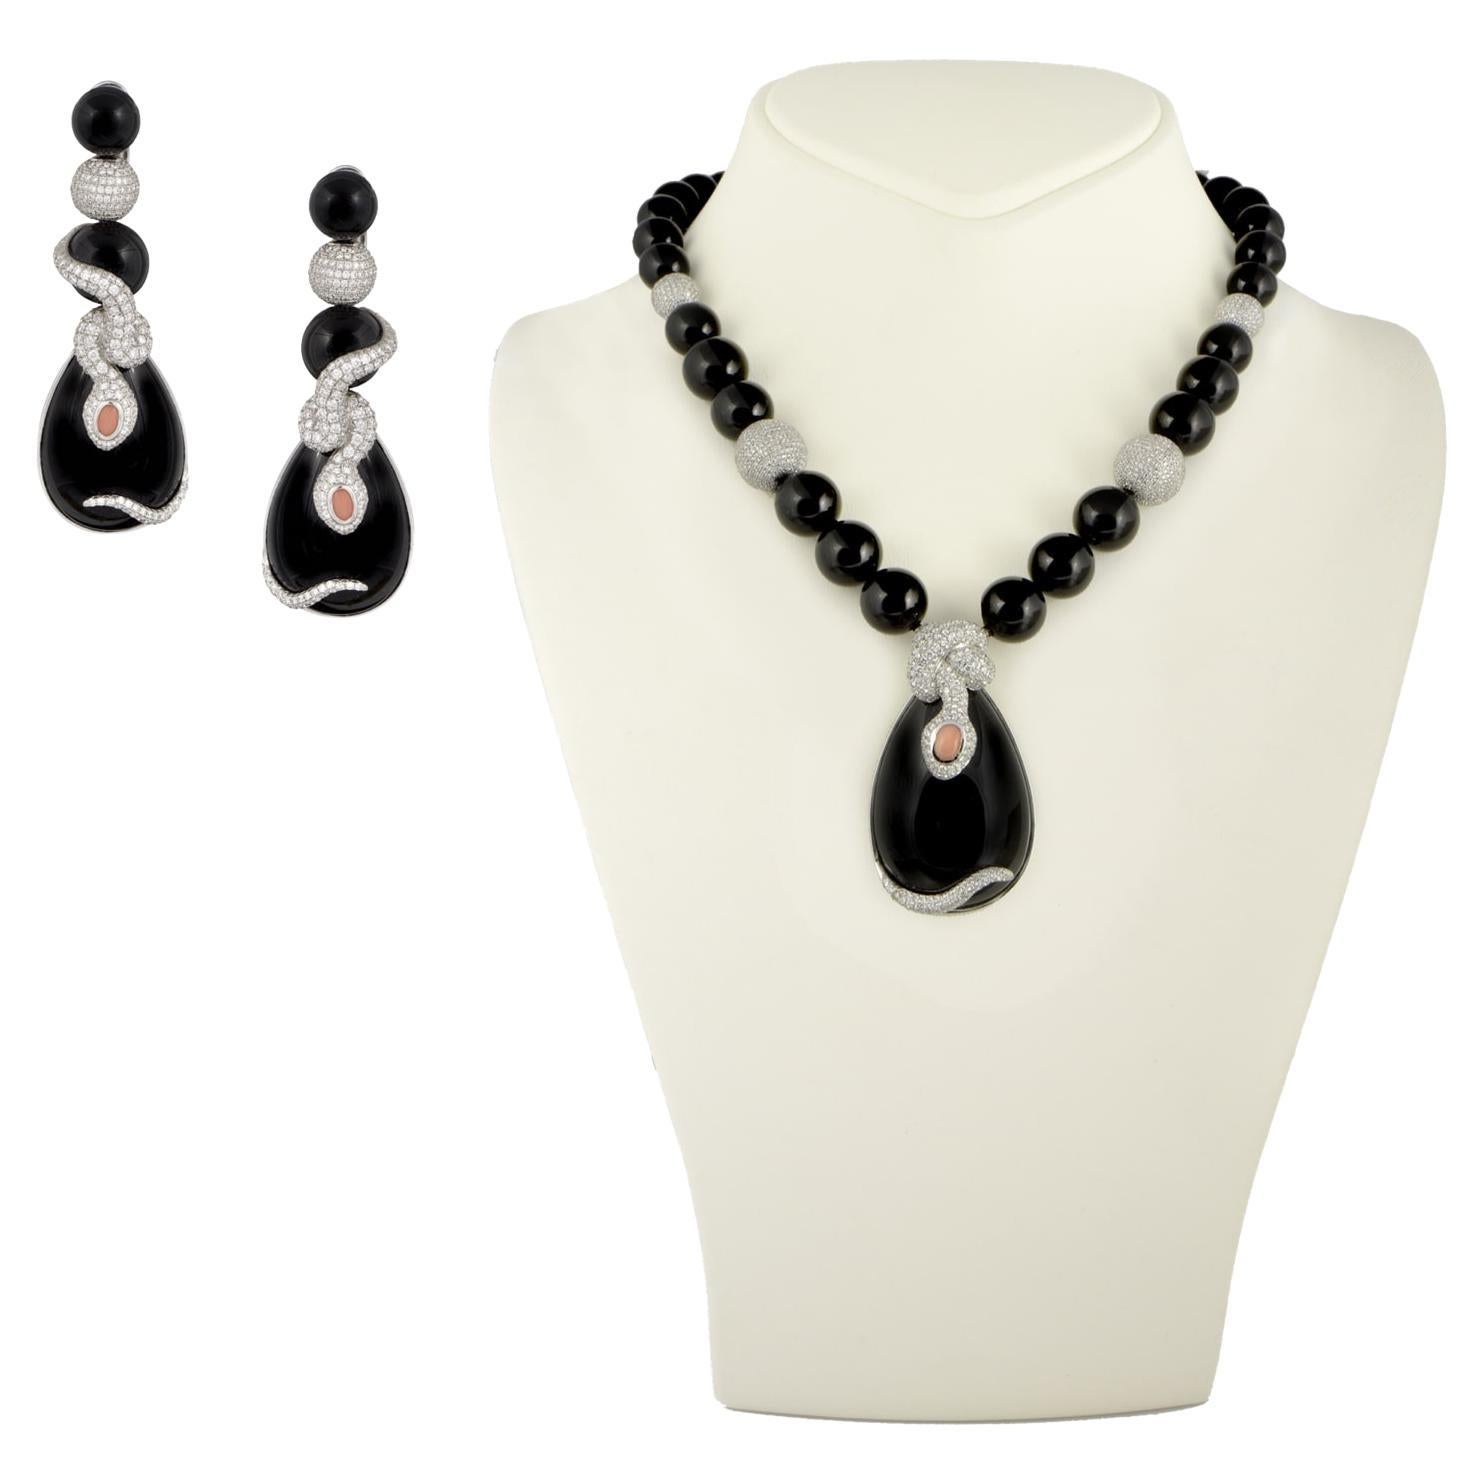 Exquisite Onyx, Diamond & Coral Earrings & Necklace Set by Victoria Cassal For Sale